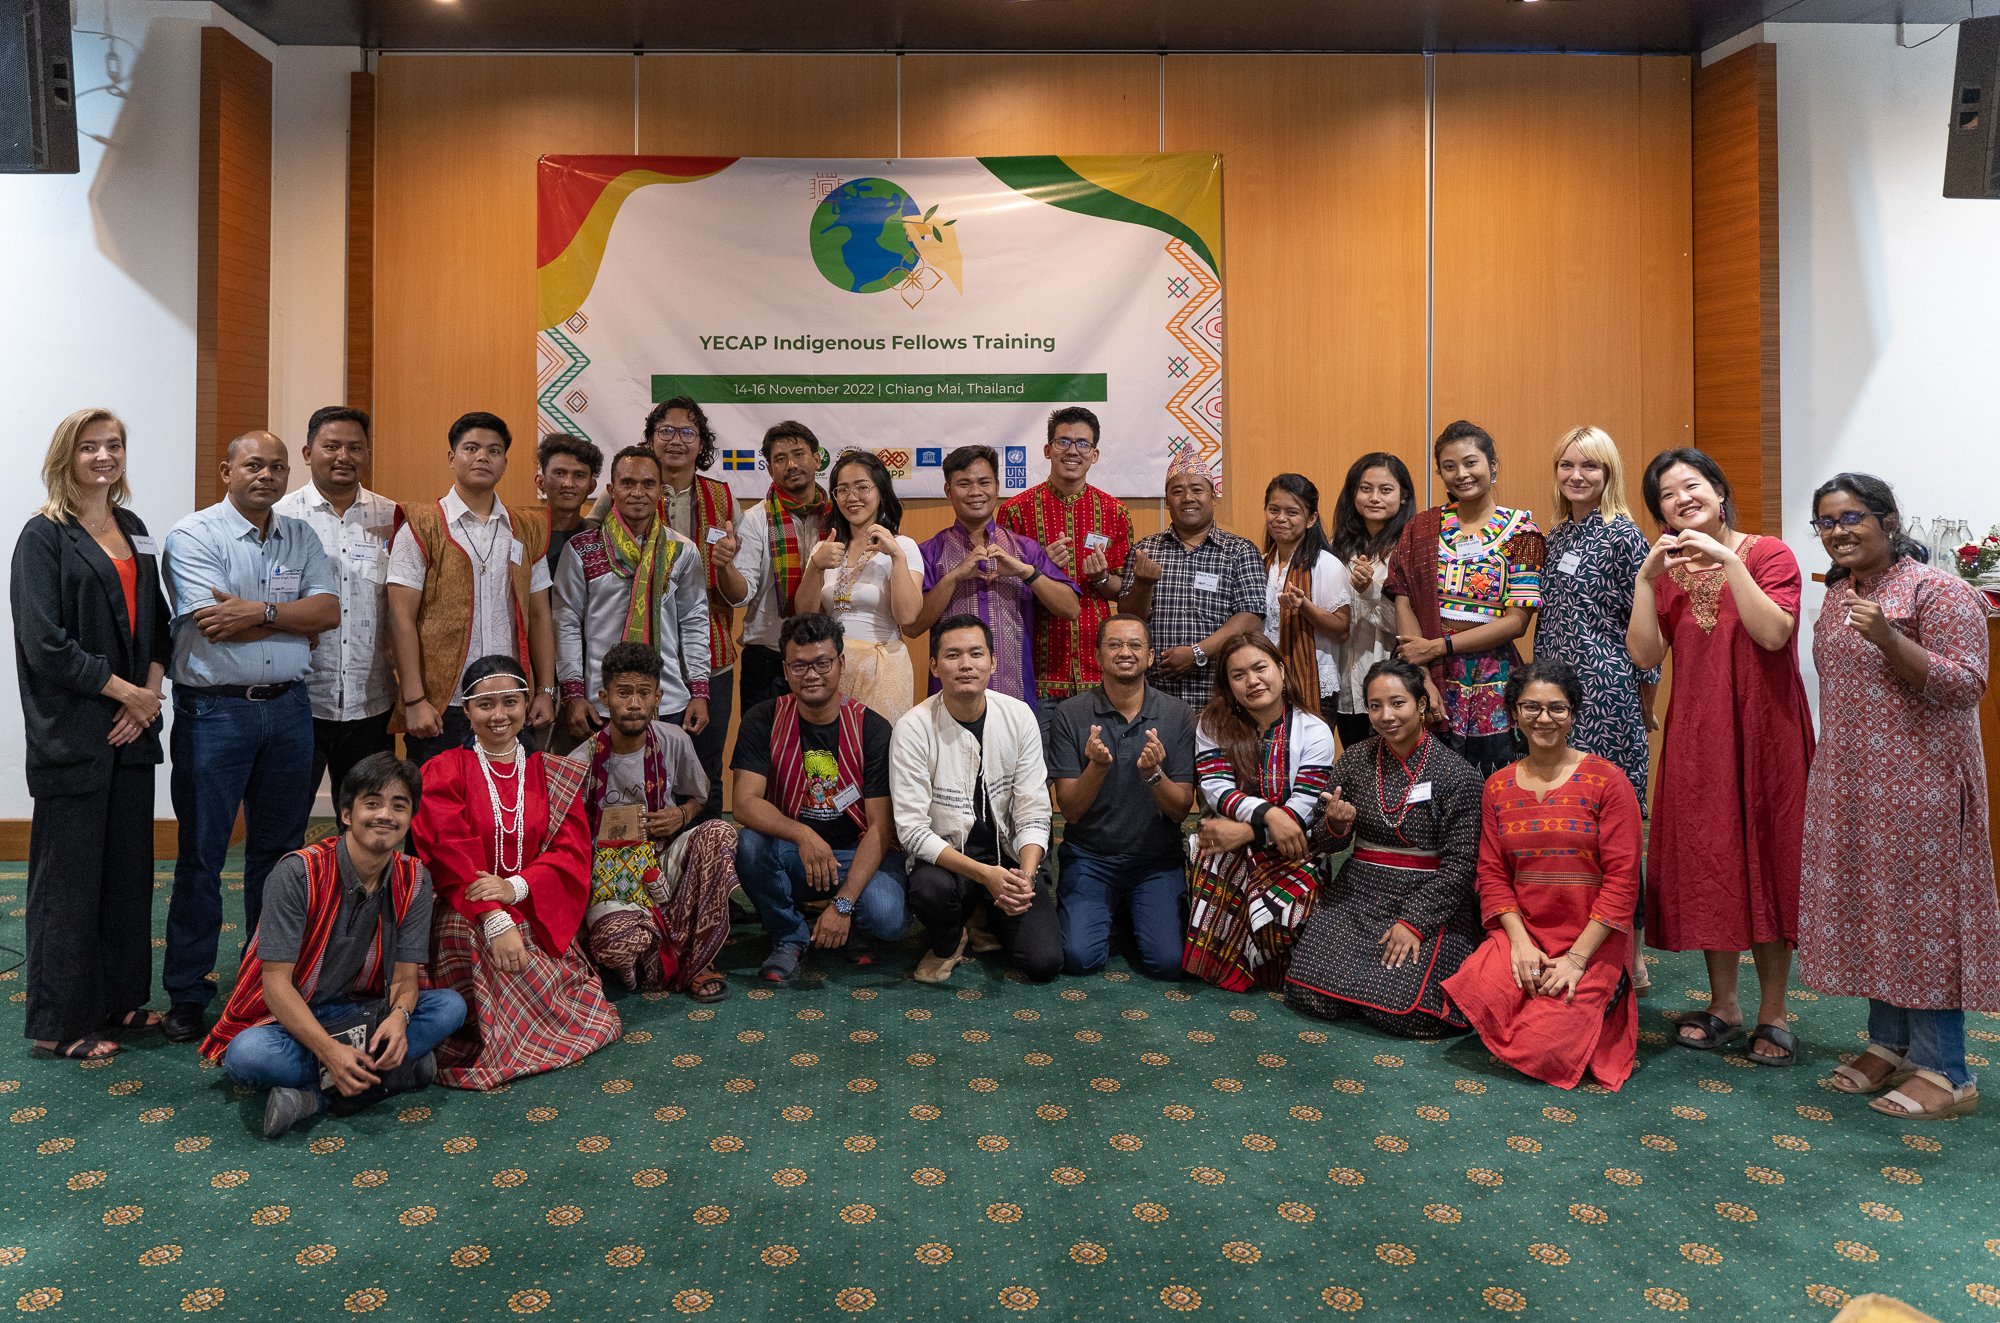 A group shot of the YECAP indigenous fellows training participants